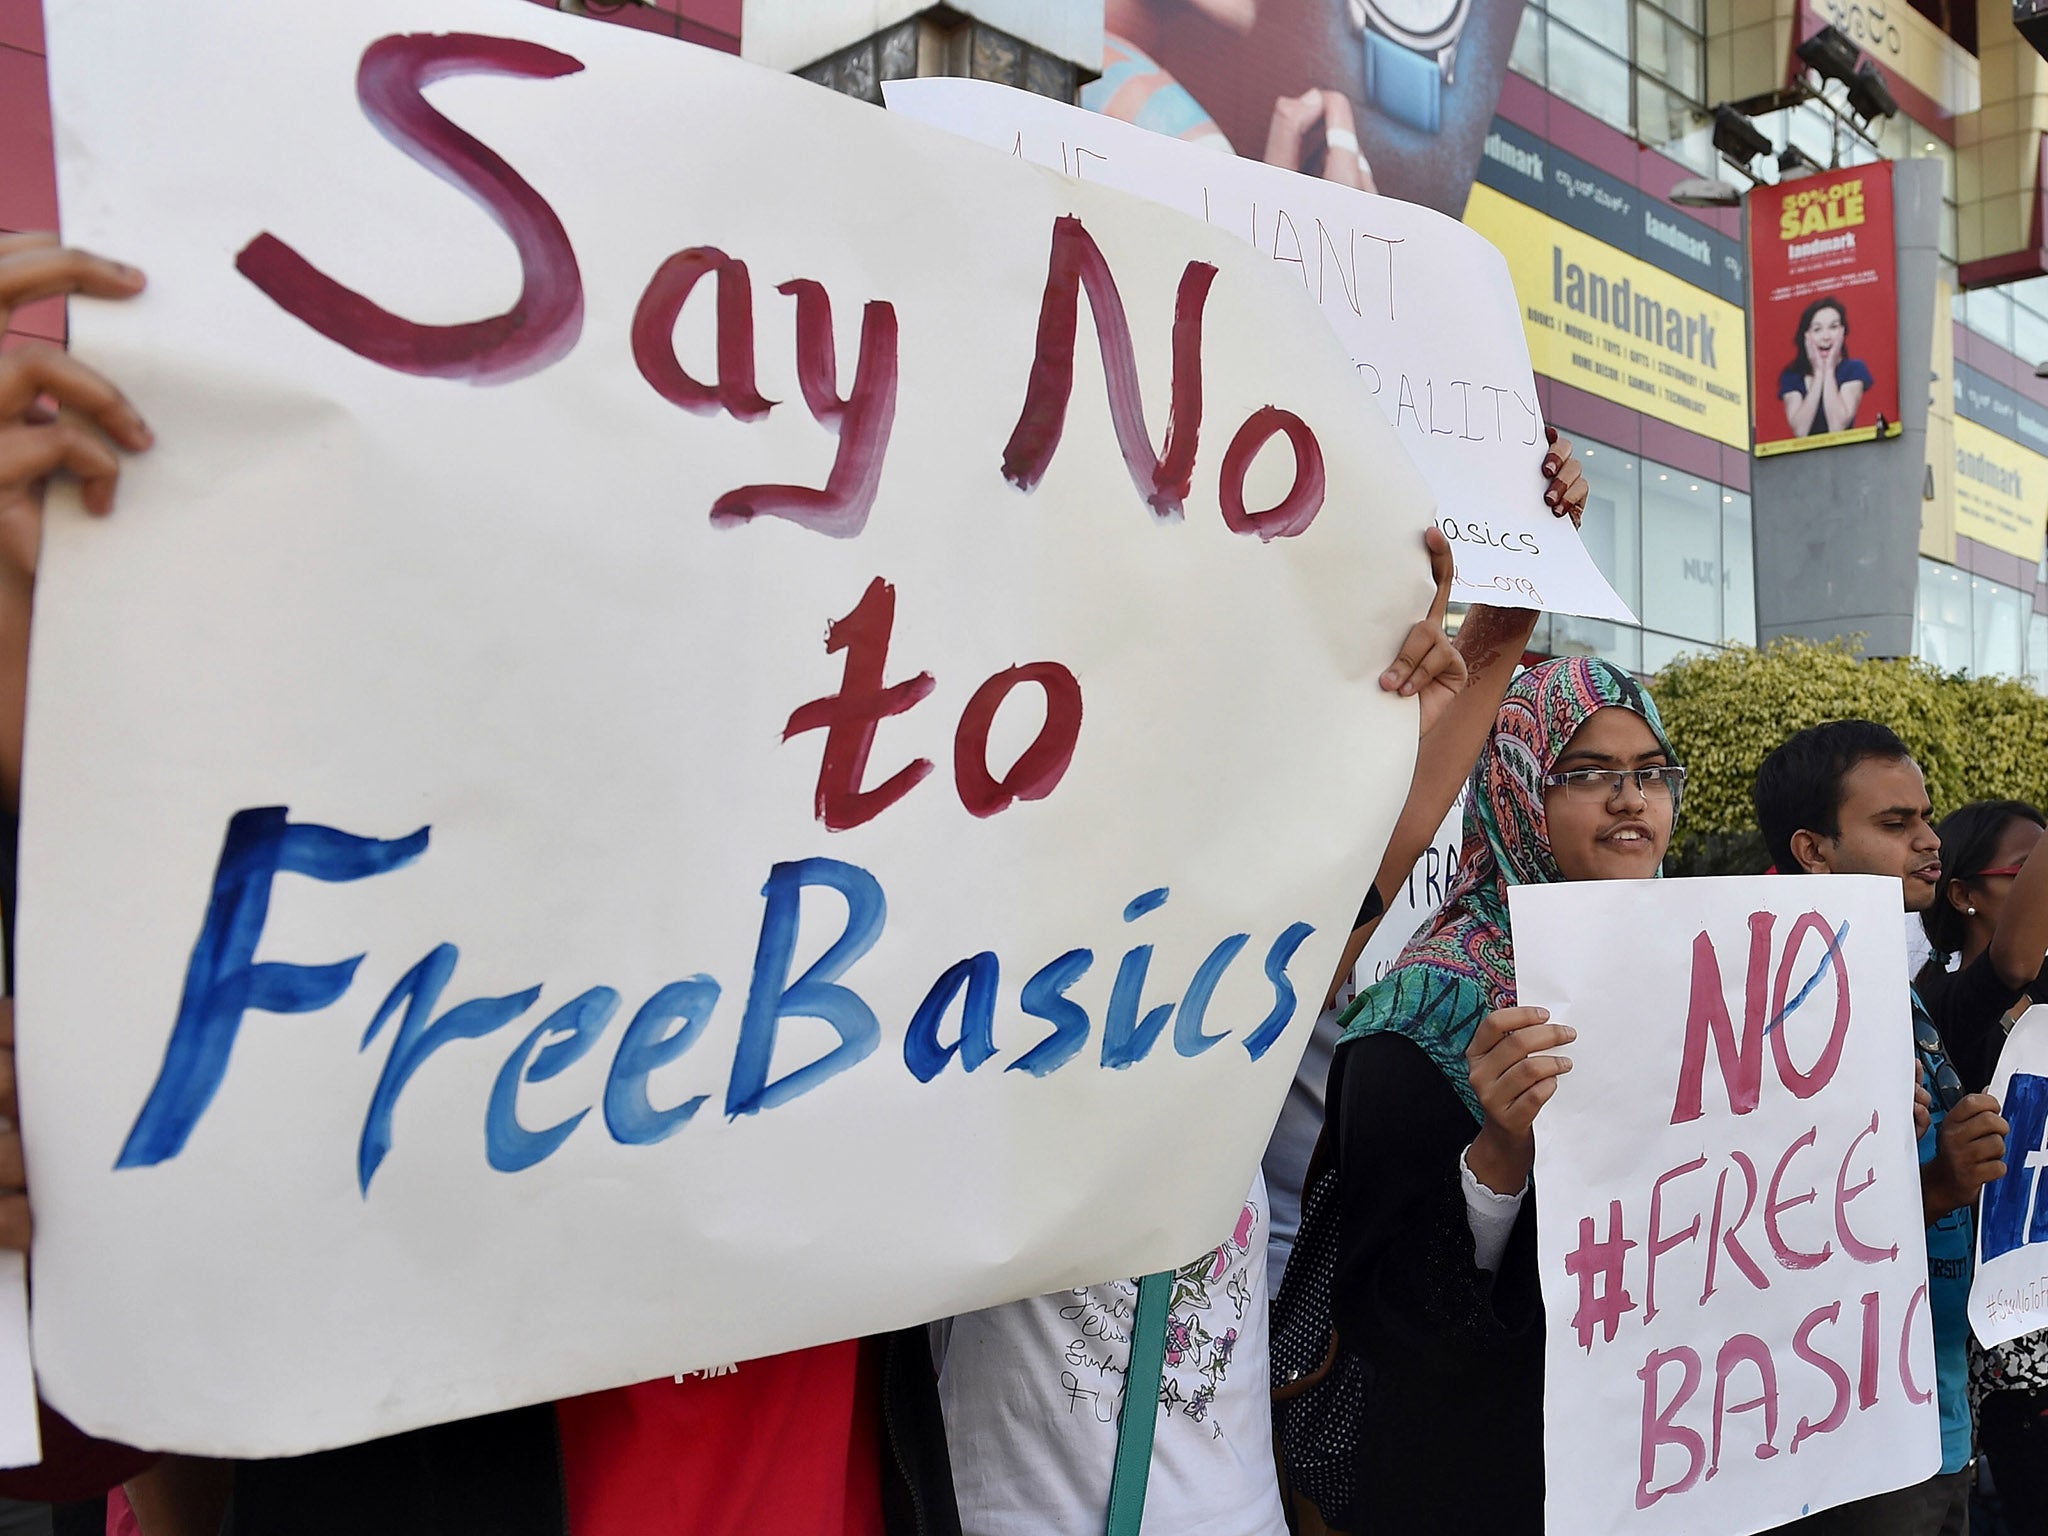 Indian demonstrators of Free Software Movement Karnataka hold placards during a protest against Facebook's Free Basics initiative, in Bangalore.